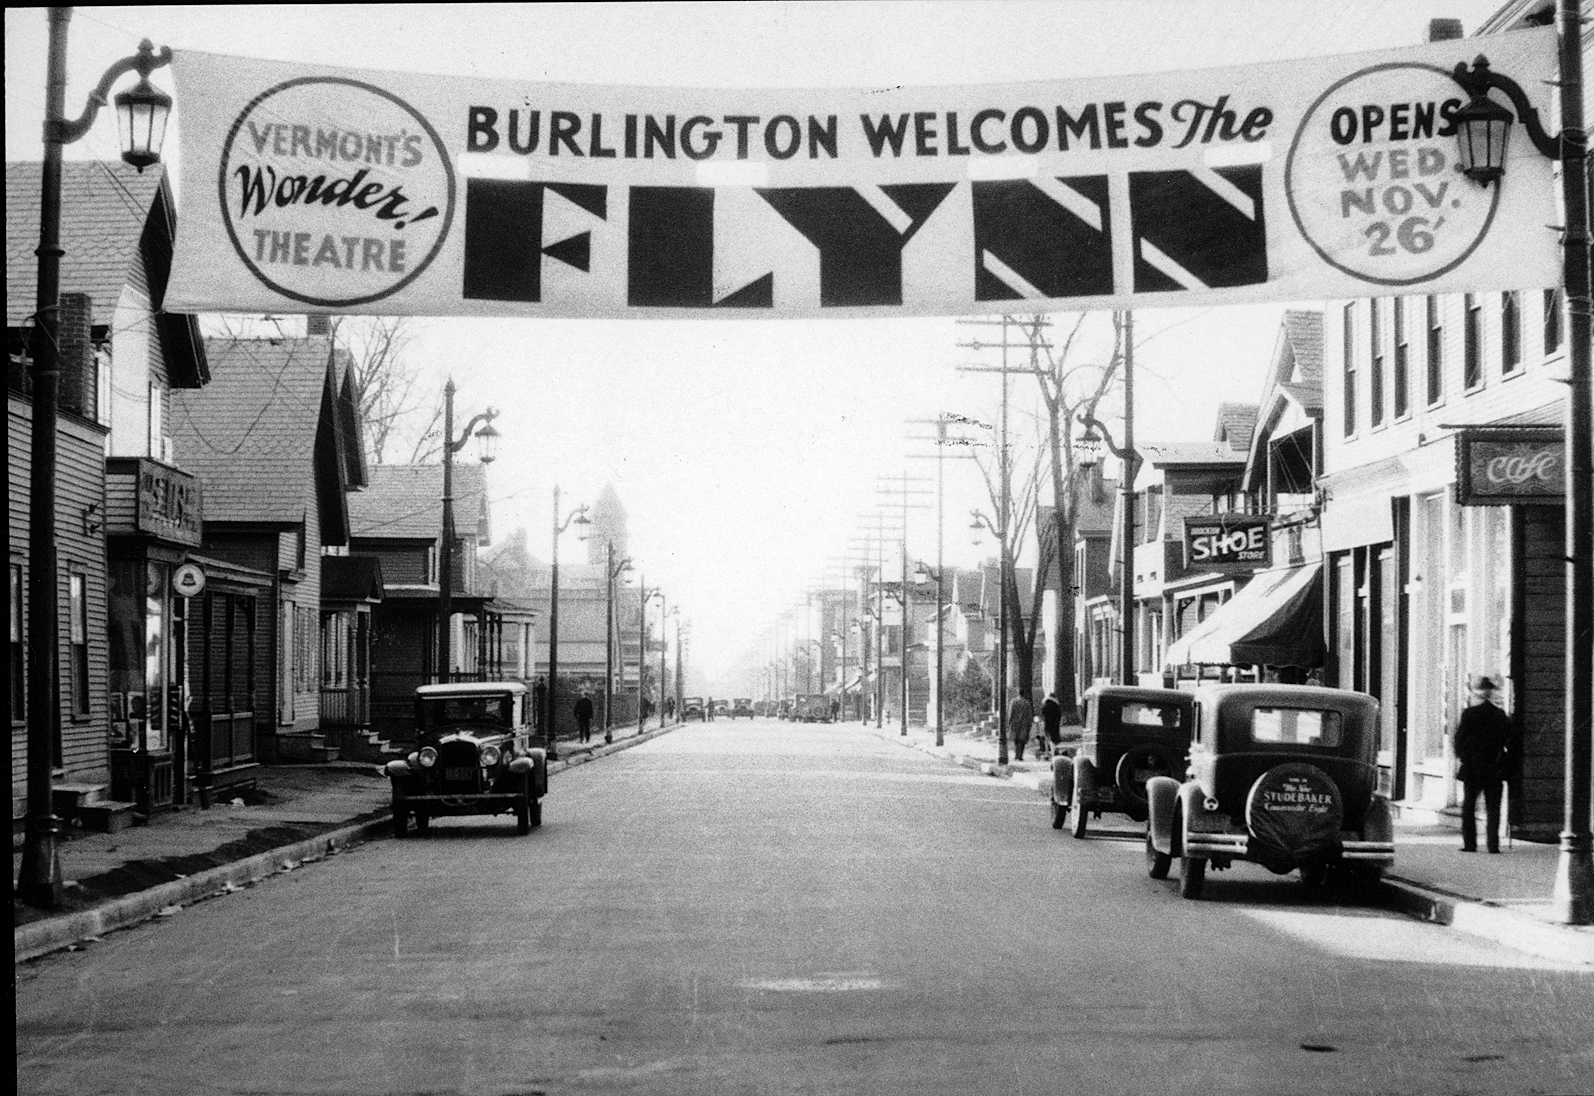 Historical picture of Burlington with the Flynn Wonder Theatre banner over the street.